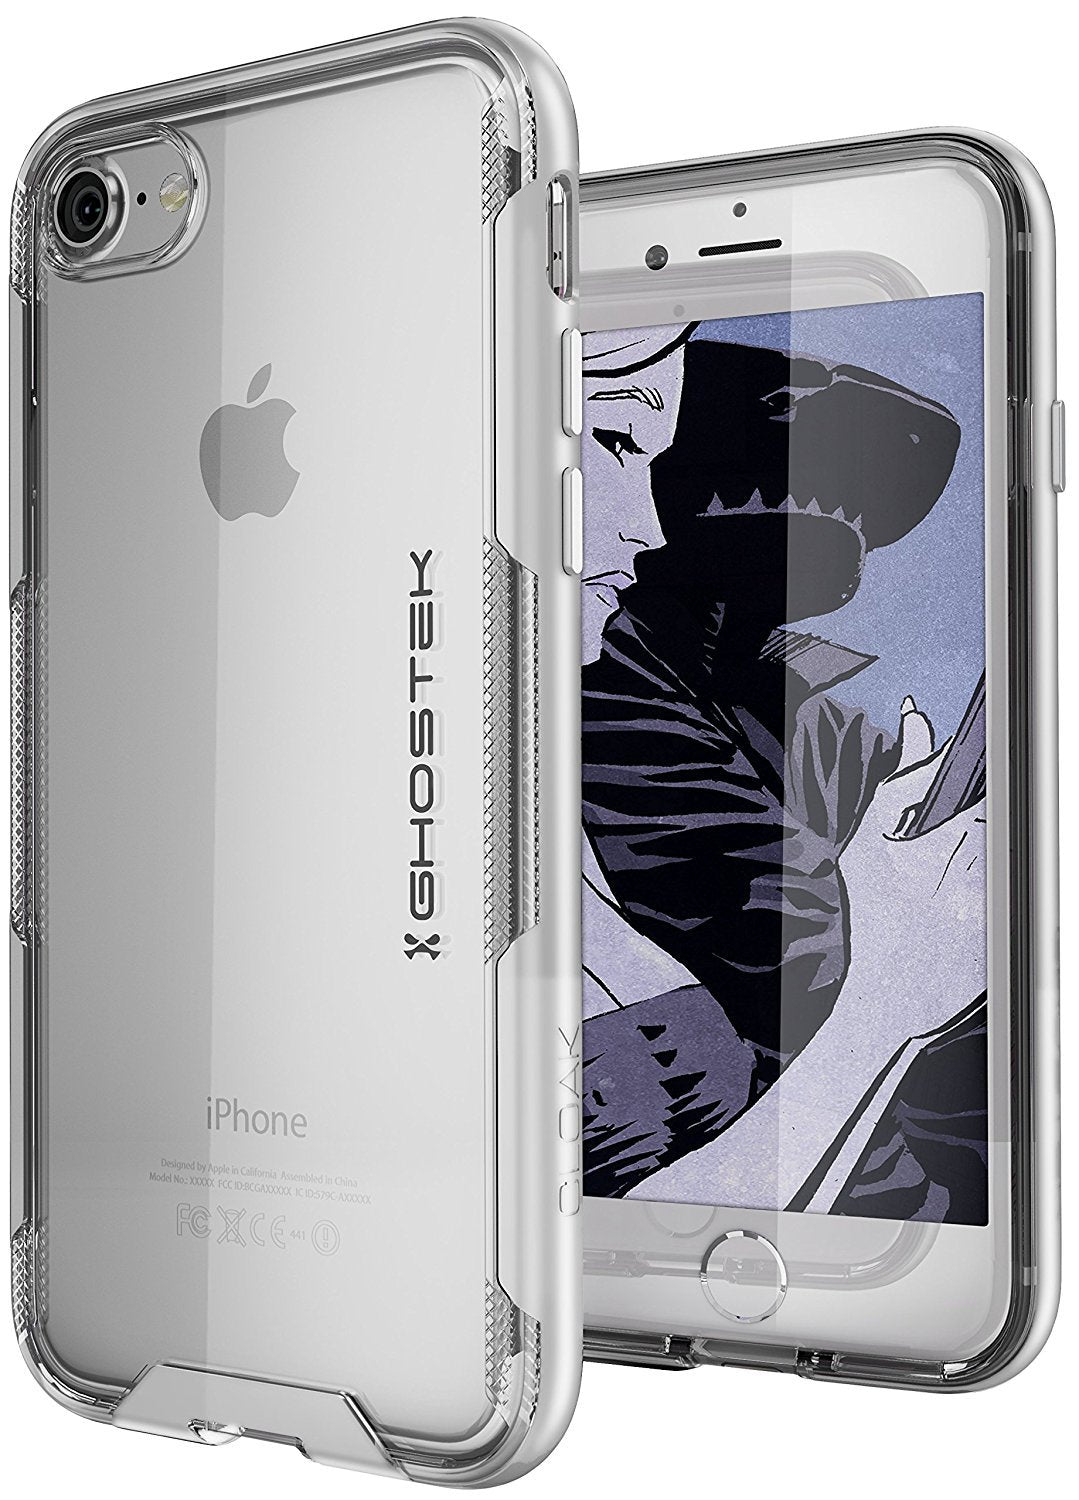 iPhone 7 Case, Ghostek Cloak 3 Series Case for iPhone 7 Case Clear Protective Case [SILVER]